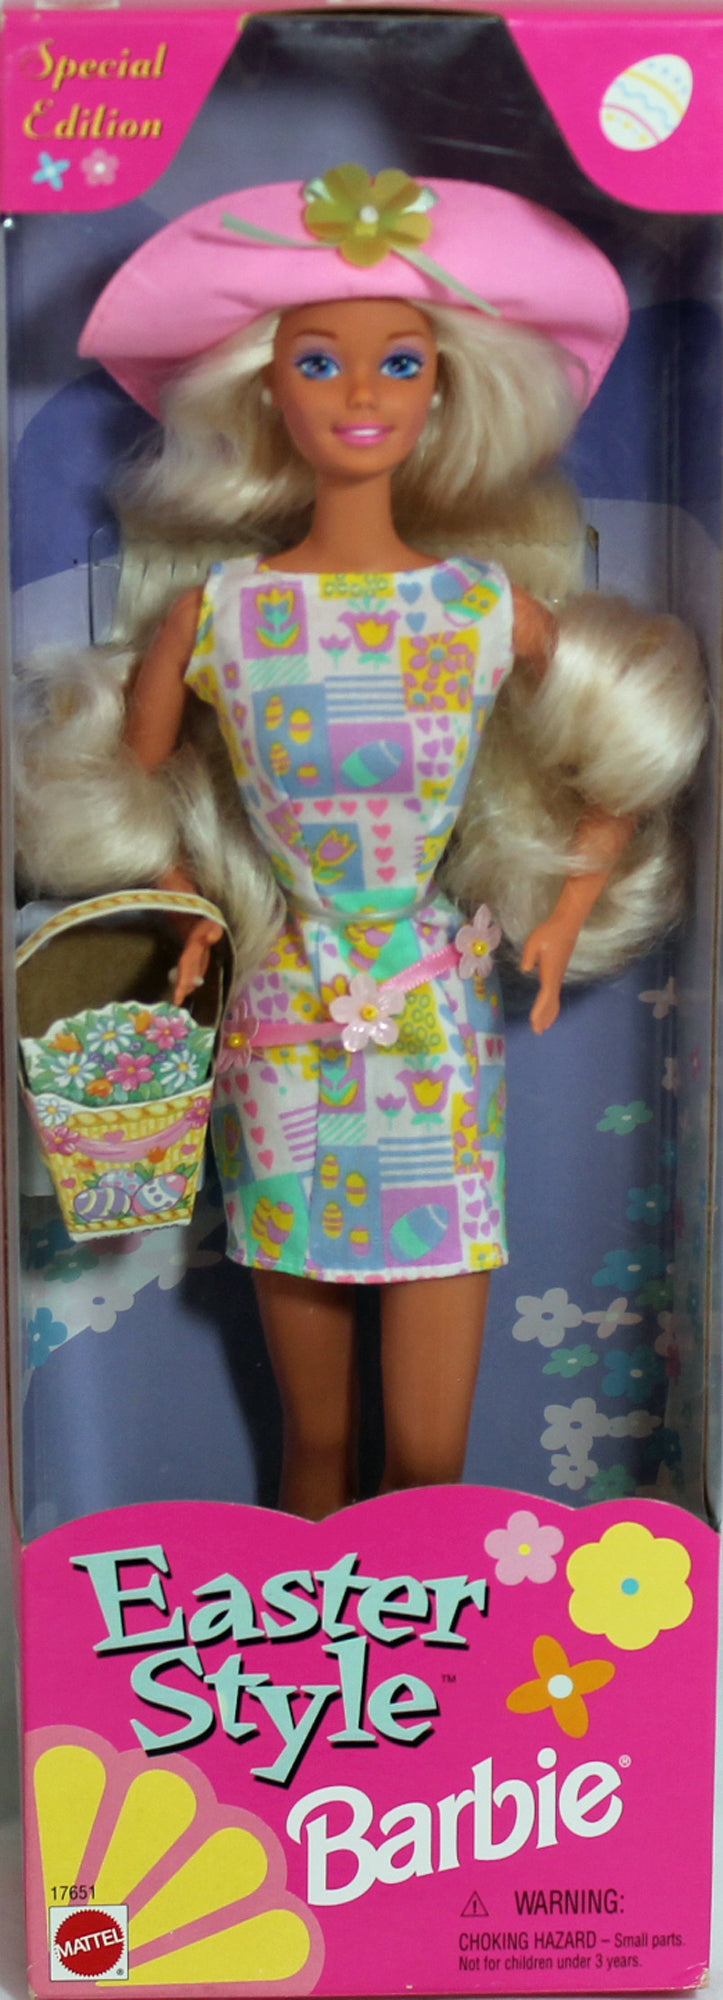 1997 Easter Style Barbie (17651)